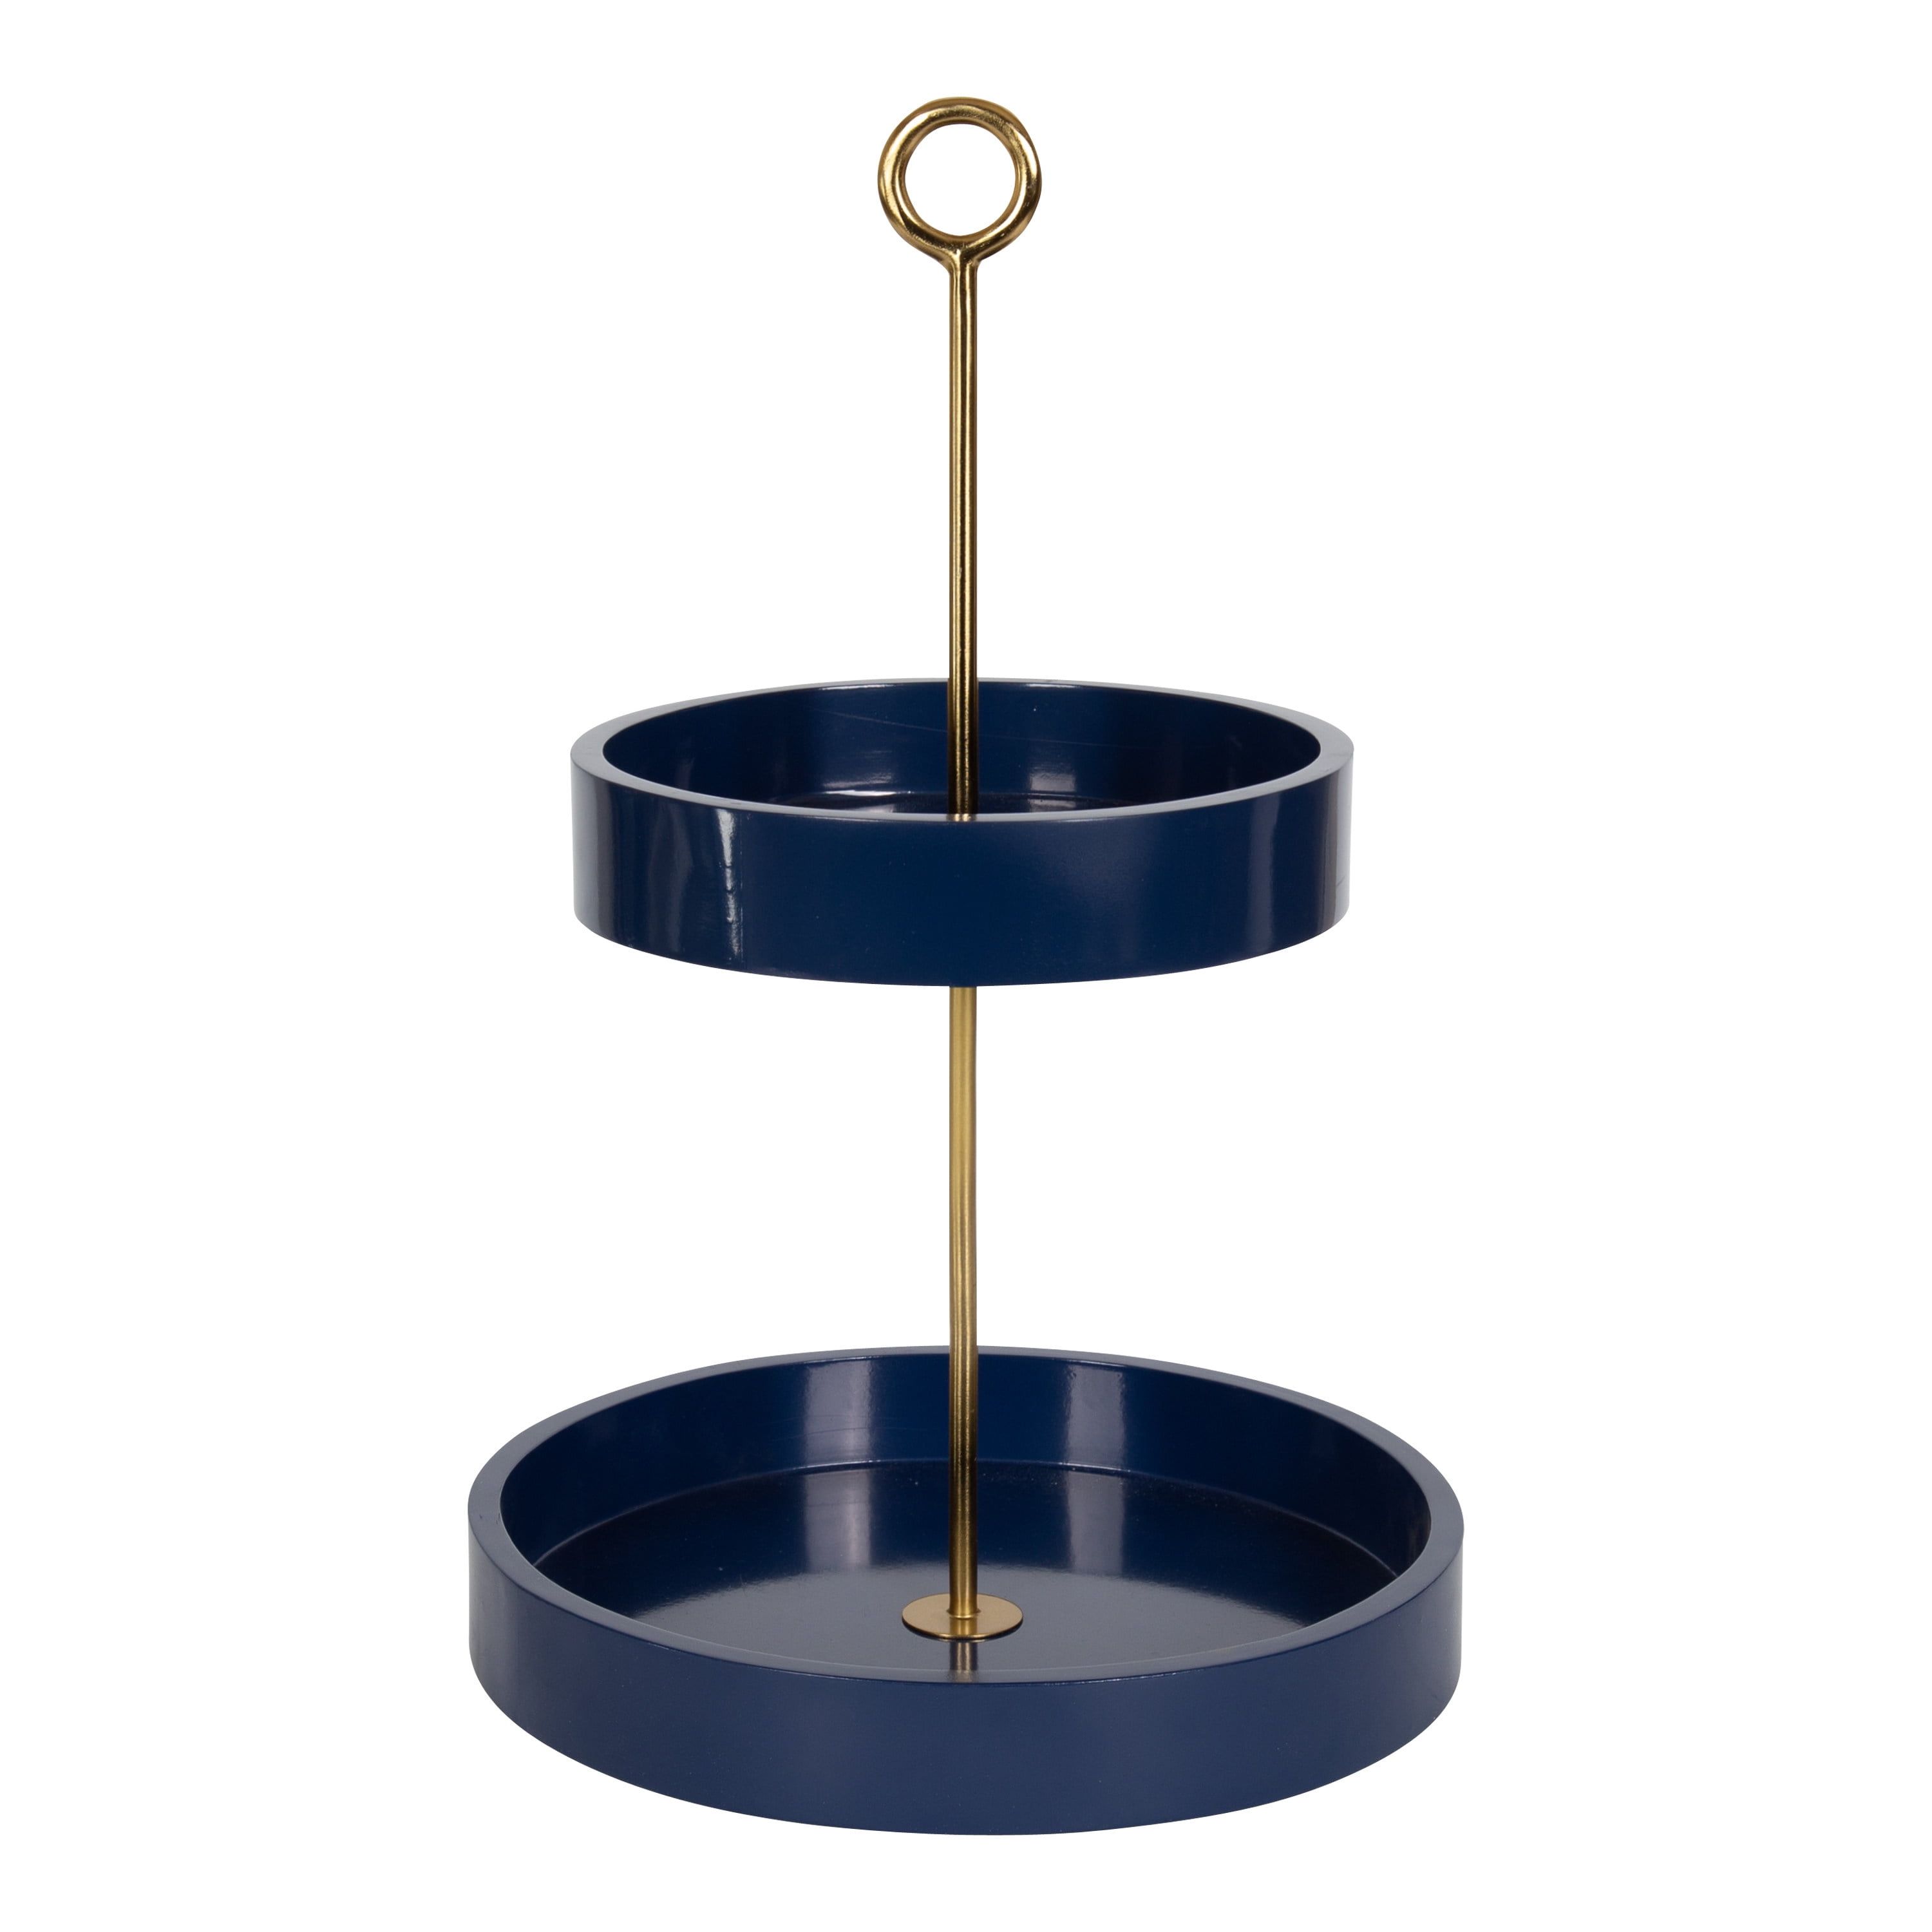 Lipton Glamorous Navy Blue and Gold Round Two-Tier Tray